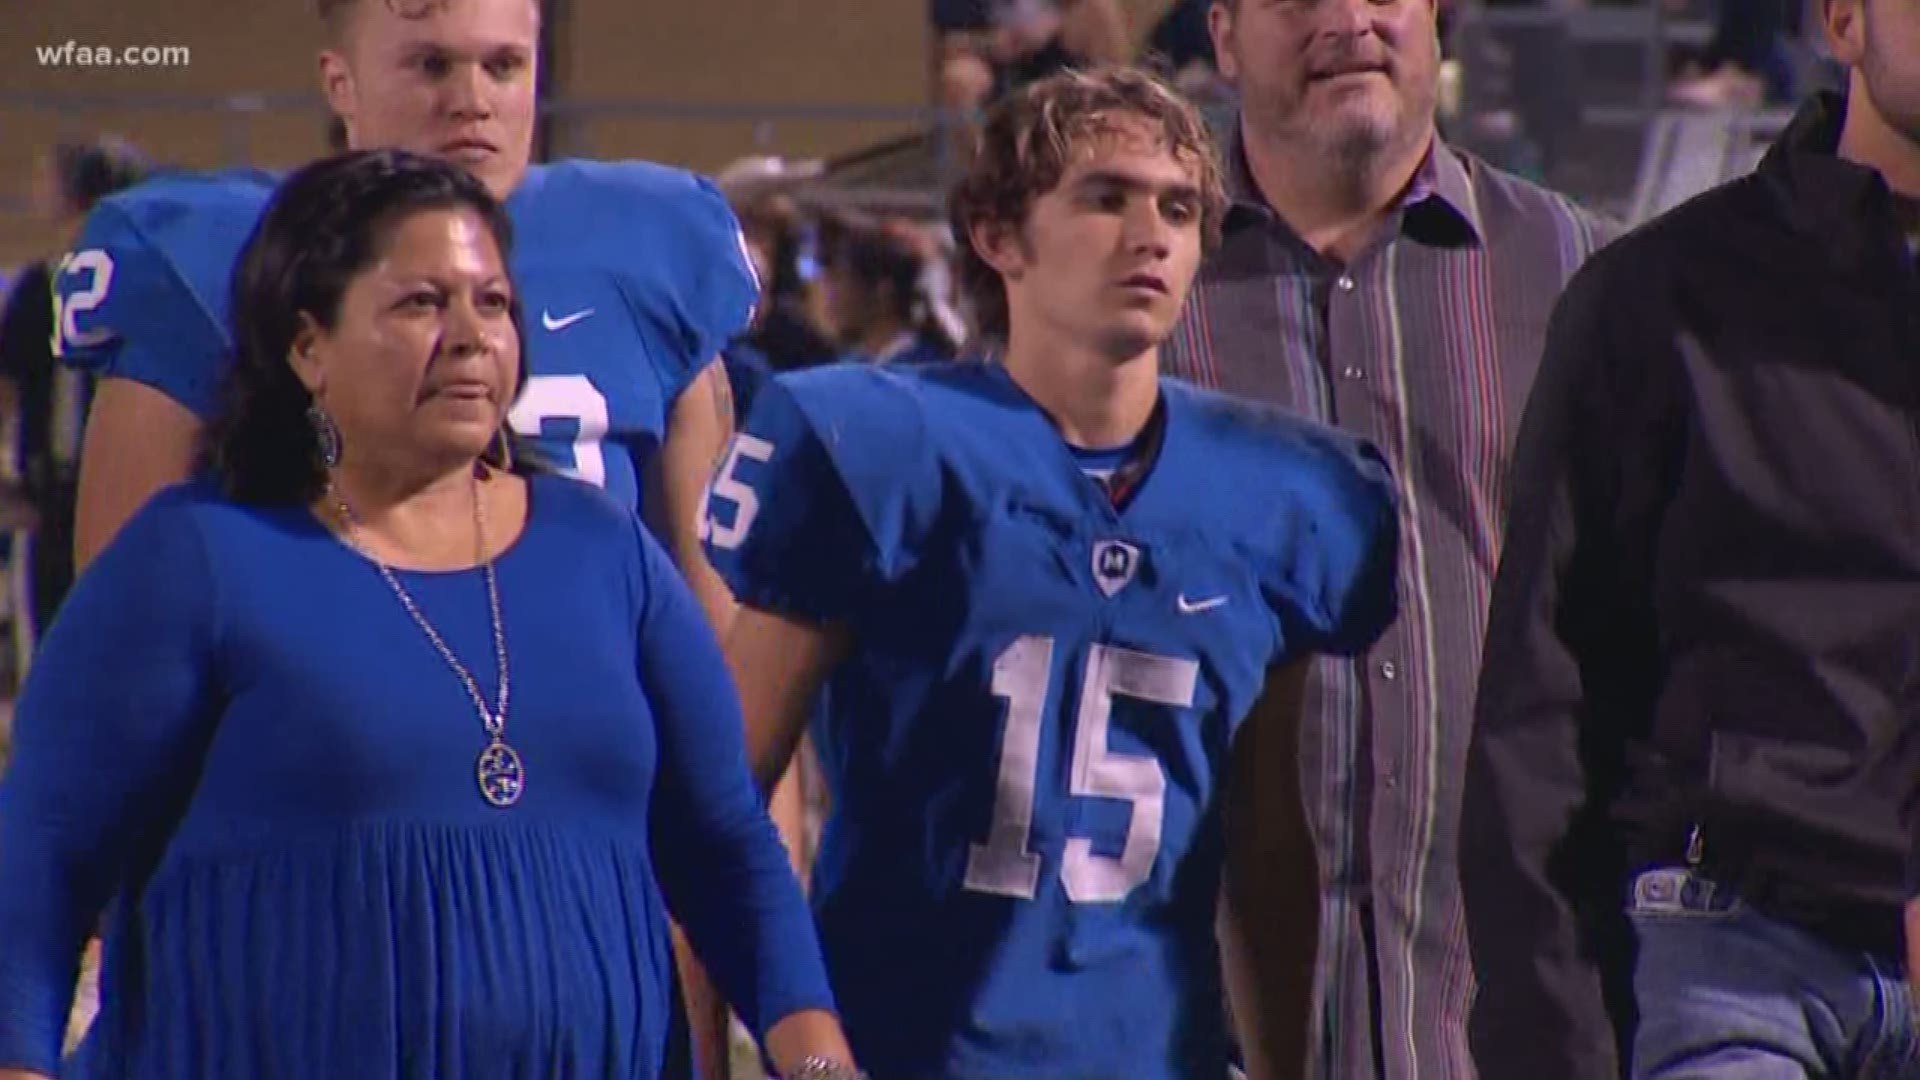 A family surprise under the Friday night lights